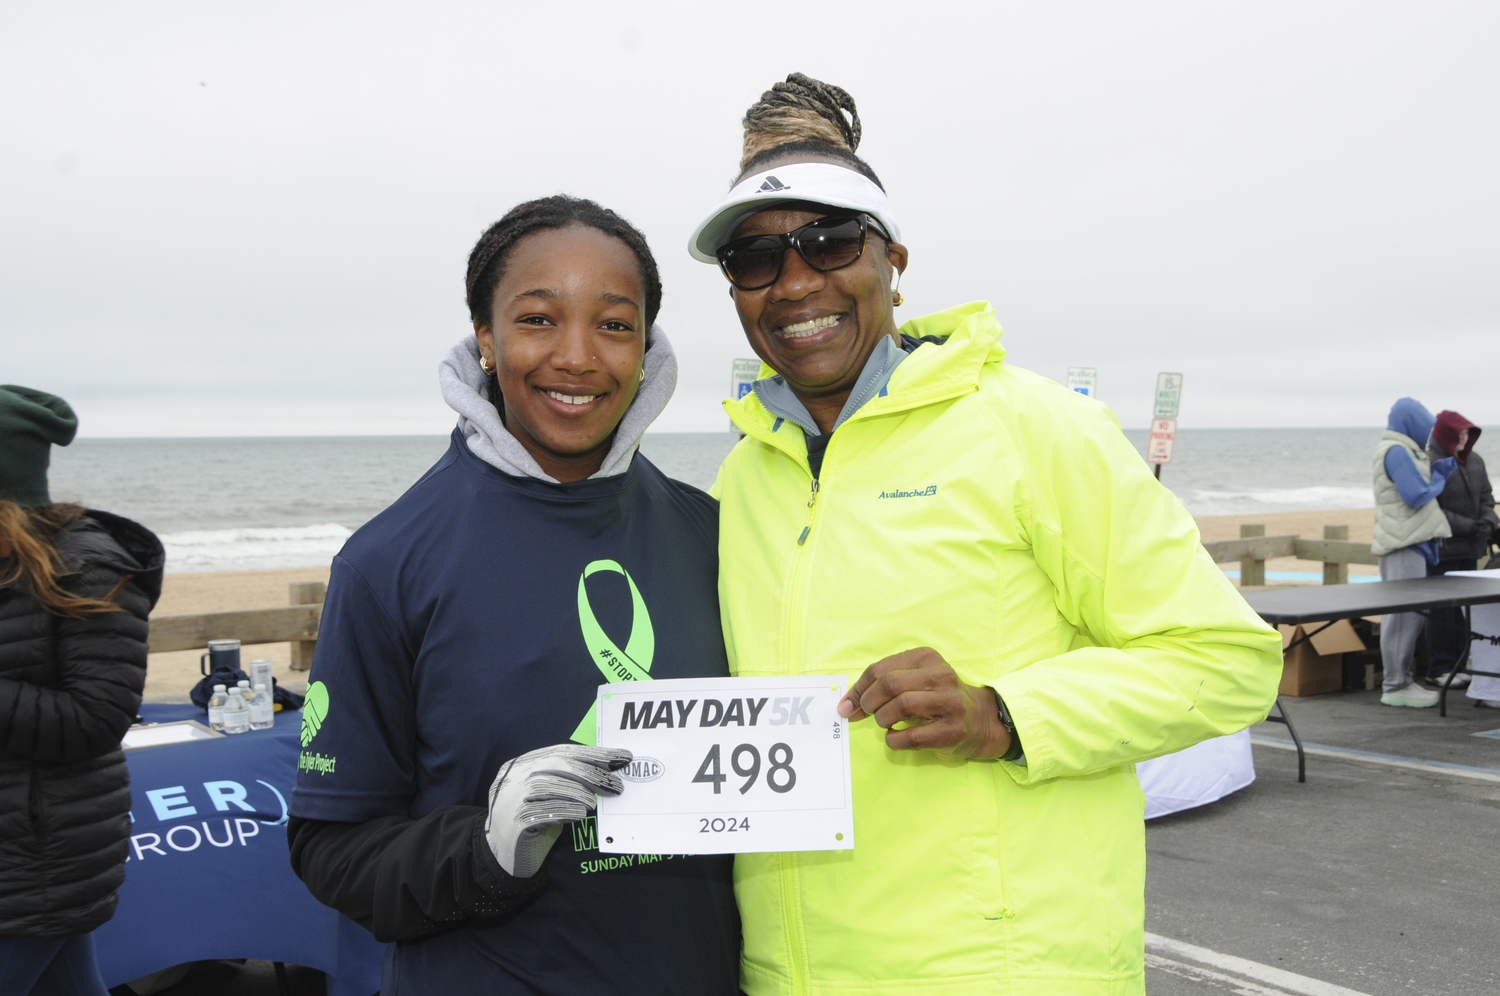 Leslie Samuel and Julianne Moseley at East Hampton's Main Beach early on Sunday morning, to prepare for the start of the annual May Day 5K Run, this year benefiting The Tyler Project (tylerproject.org). Over 900 people signed up for the Run, founded in 2021 by East Hampton High School runners Ryleigh O'Donnell and Dylan Cashin, to coincide with Mental Health Awareness Month. East Hampton Village Mayor Jerry Larsen, Village Administrator Marcos Baladron, Jennifer Fowkes of the Old Montauk Athletic Club and Bradford Billet of the East Hampton Village Foundation provided support for the Run.  RICHARD LEWIN